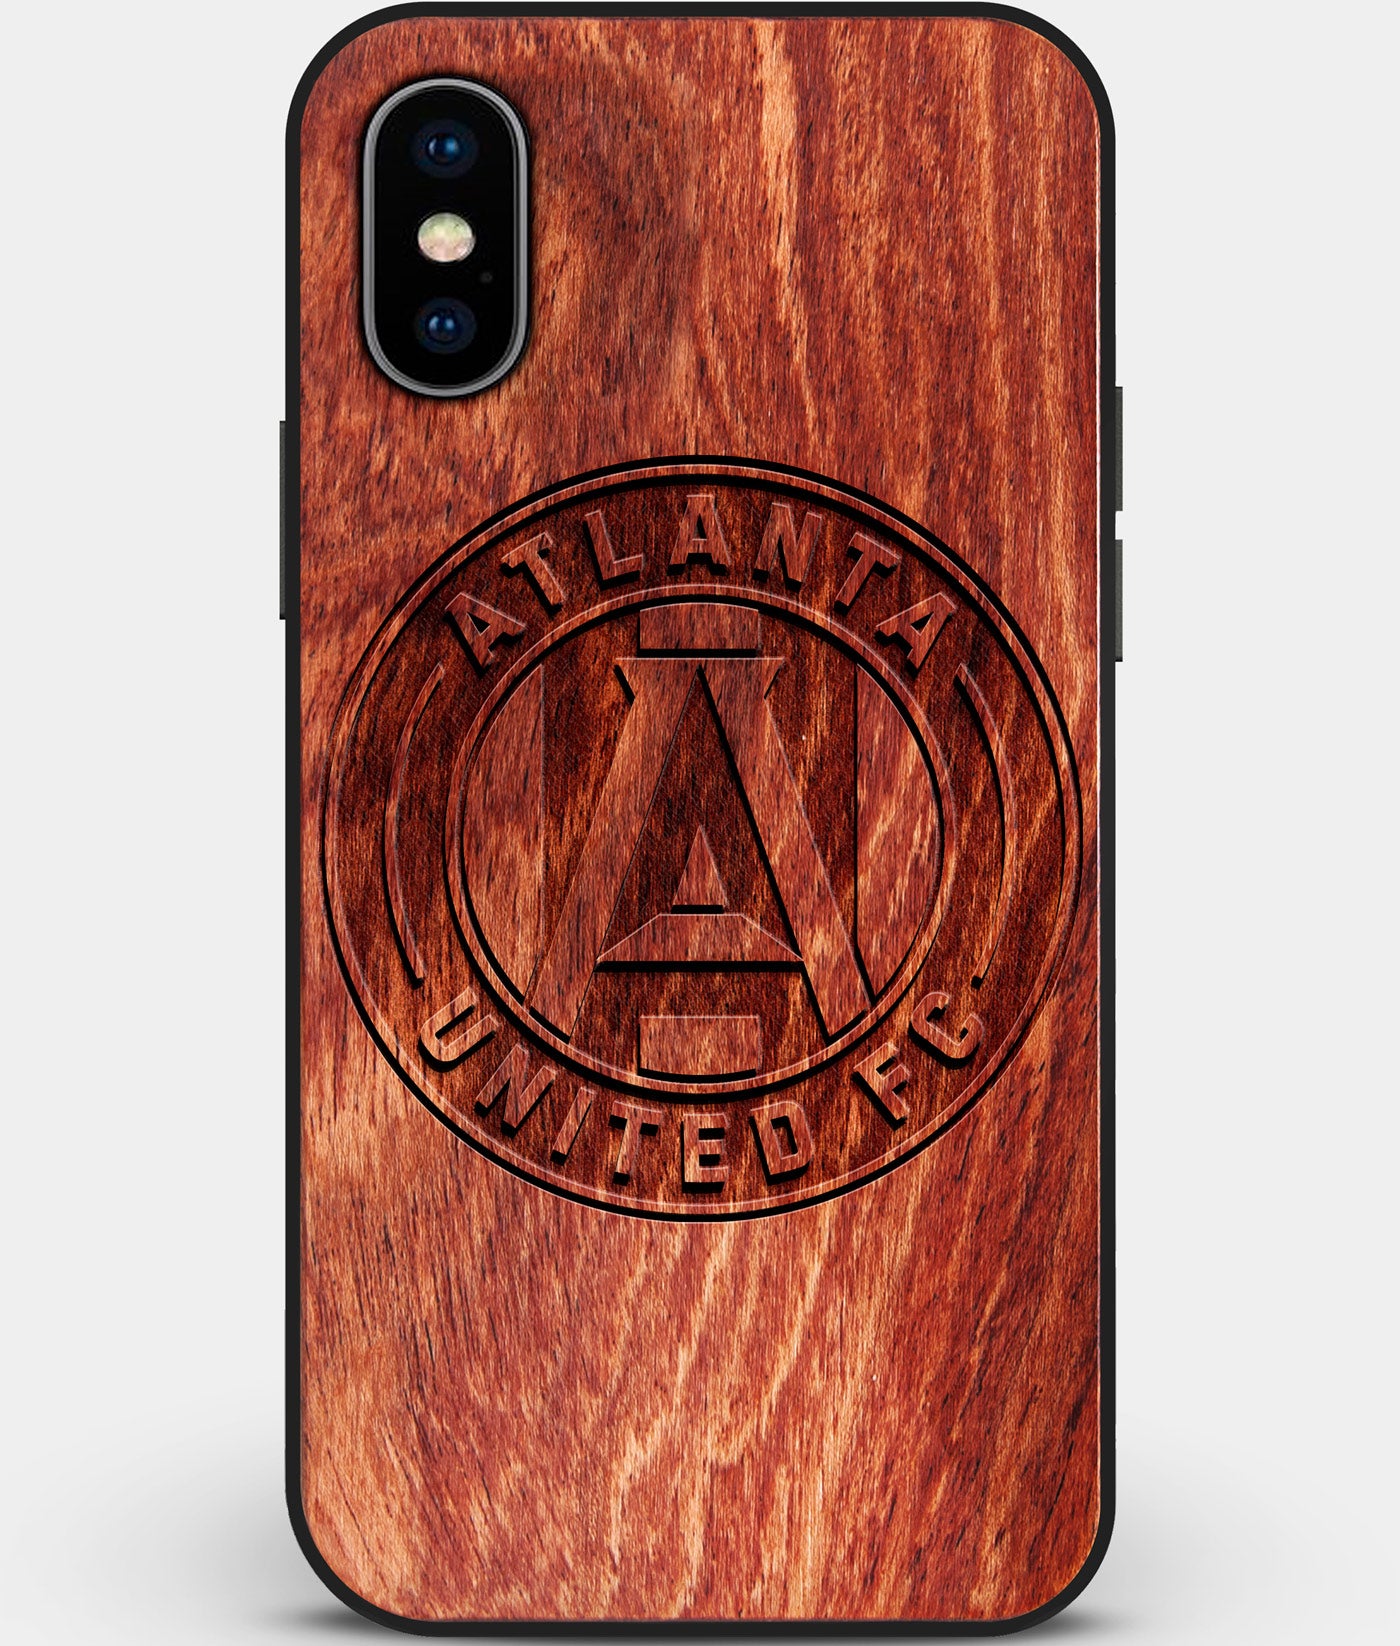 Custom Carved Wood Atlanta United FC iPhone X/XS Case | Personalized Mahogany Wood Atlanta United FC Cover, Birthday Gift, Gifts For Him, Monogrammed Gift For Fan | by Engraved In Nature